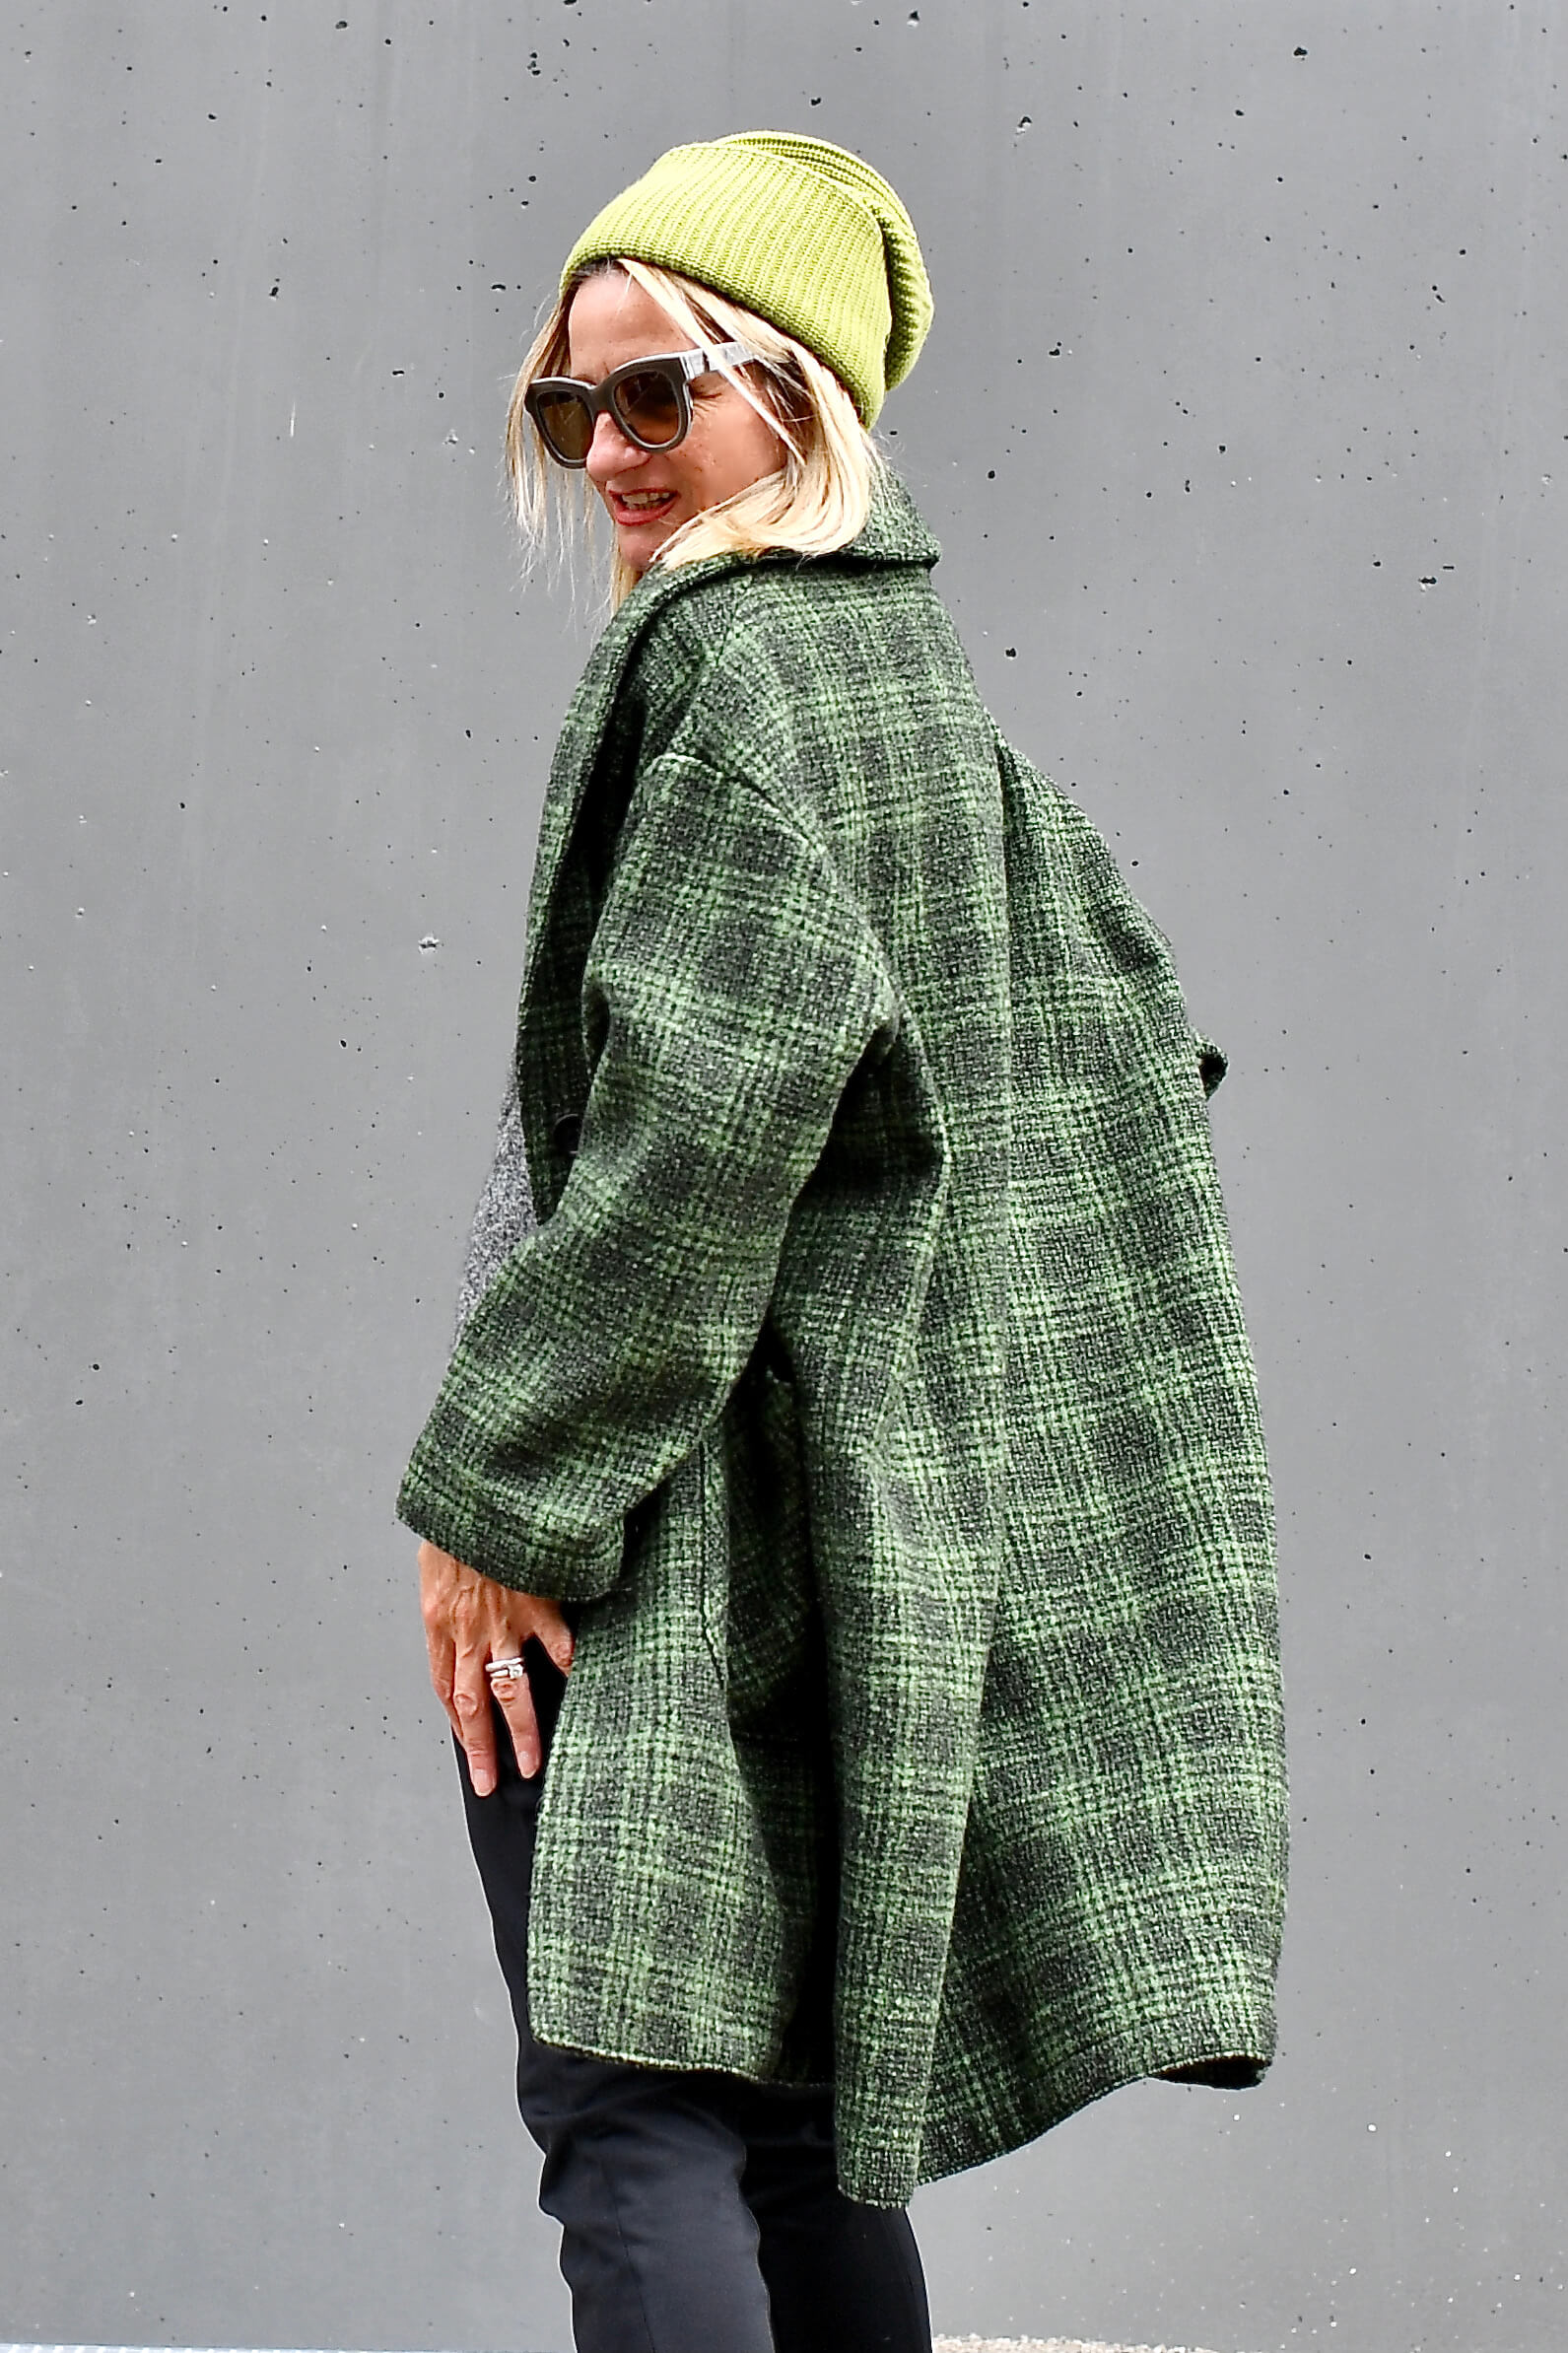 The New Tartan for this Coming Fall/Winter